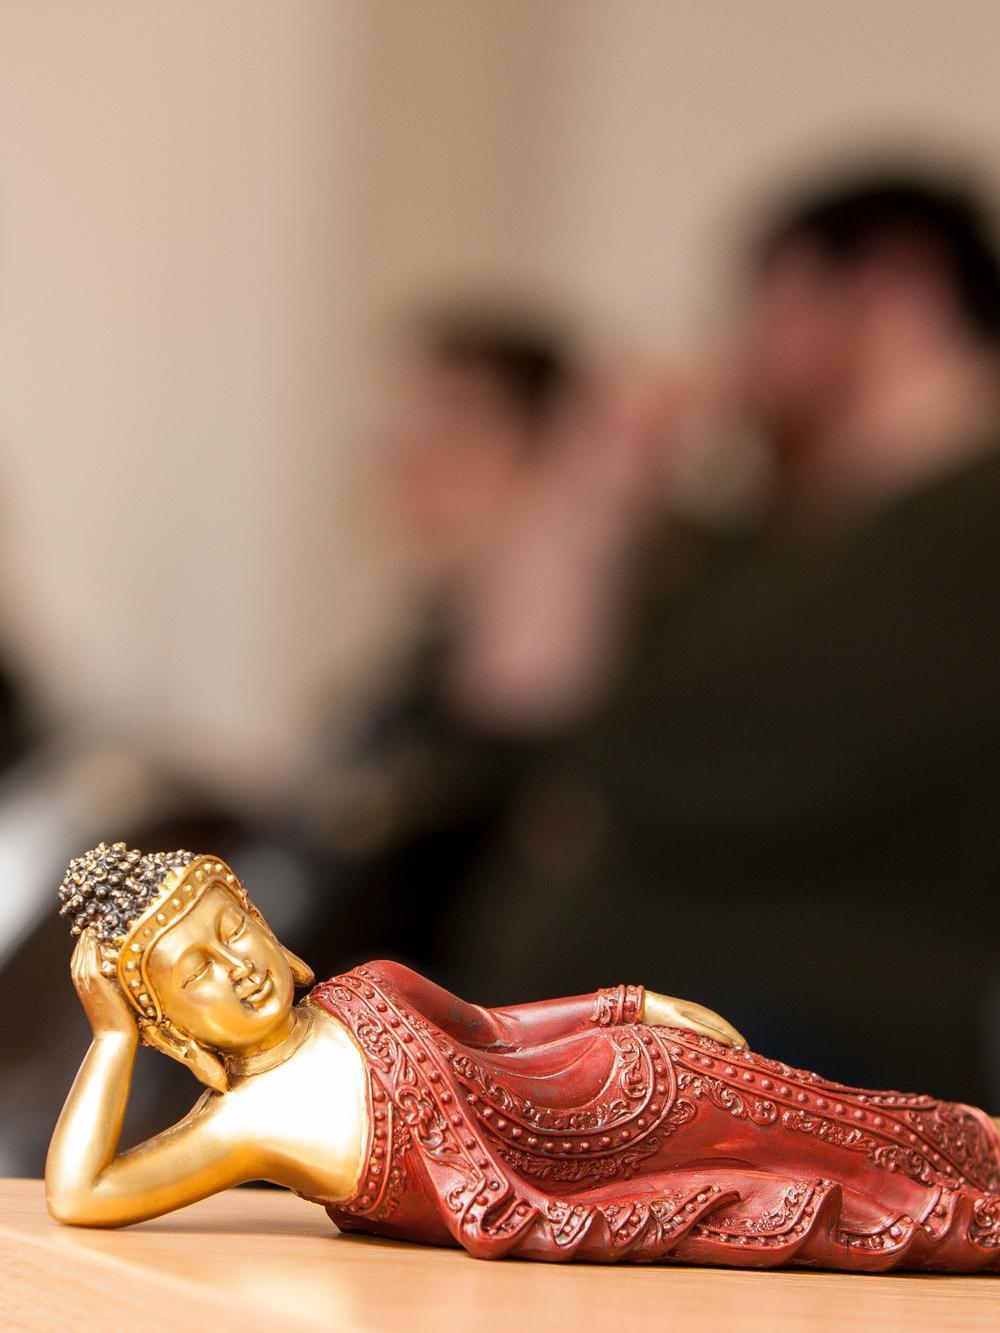 Buddah statue on desk with students blurred in the background